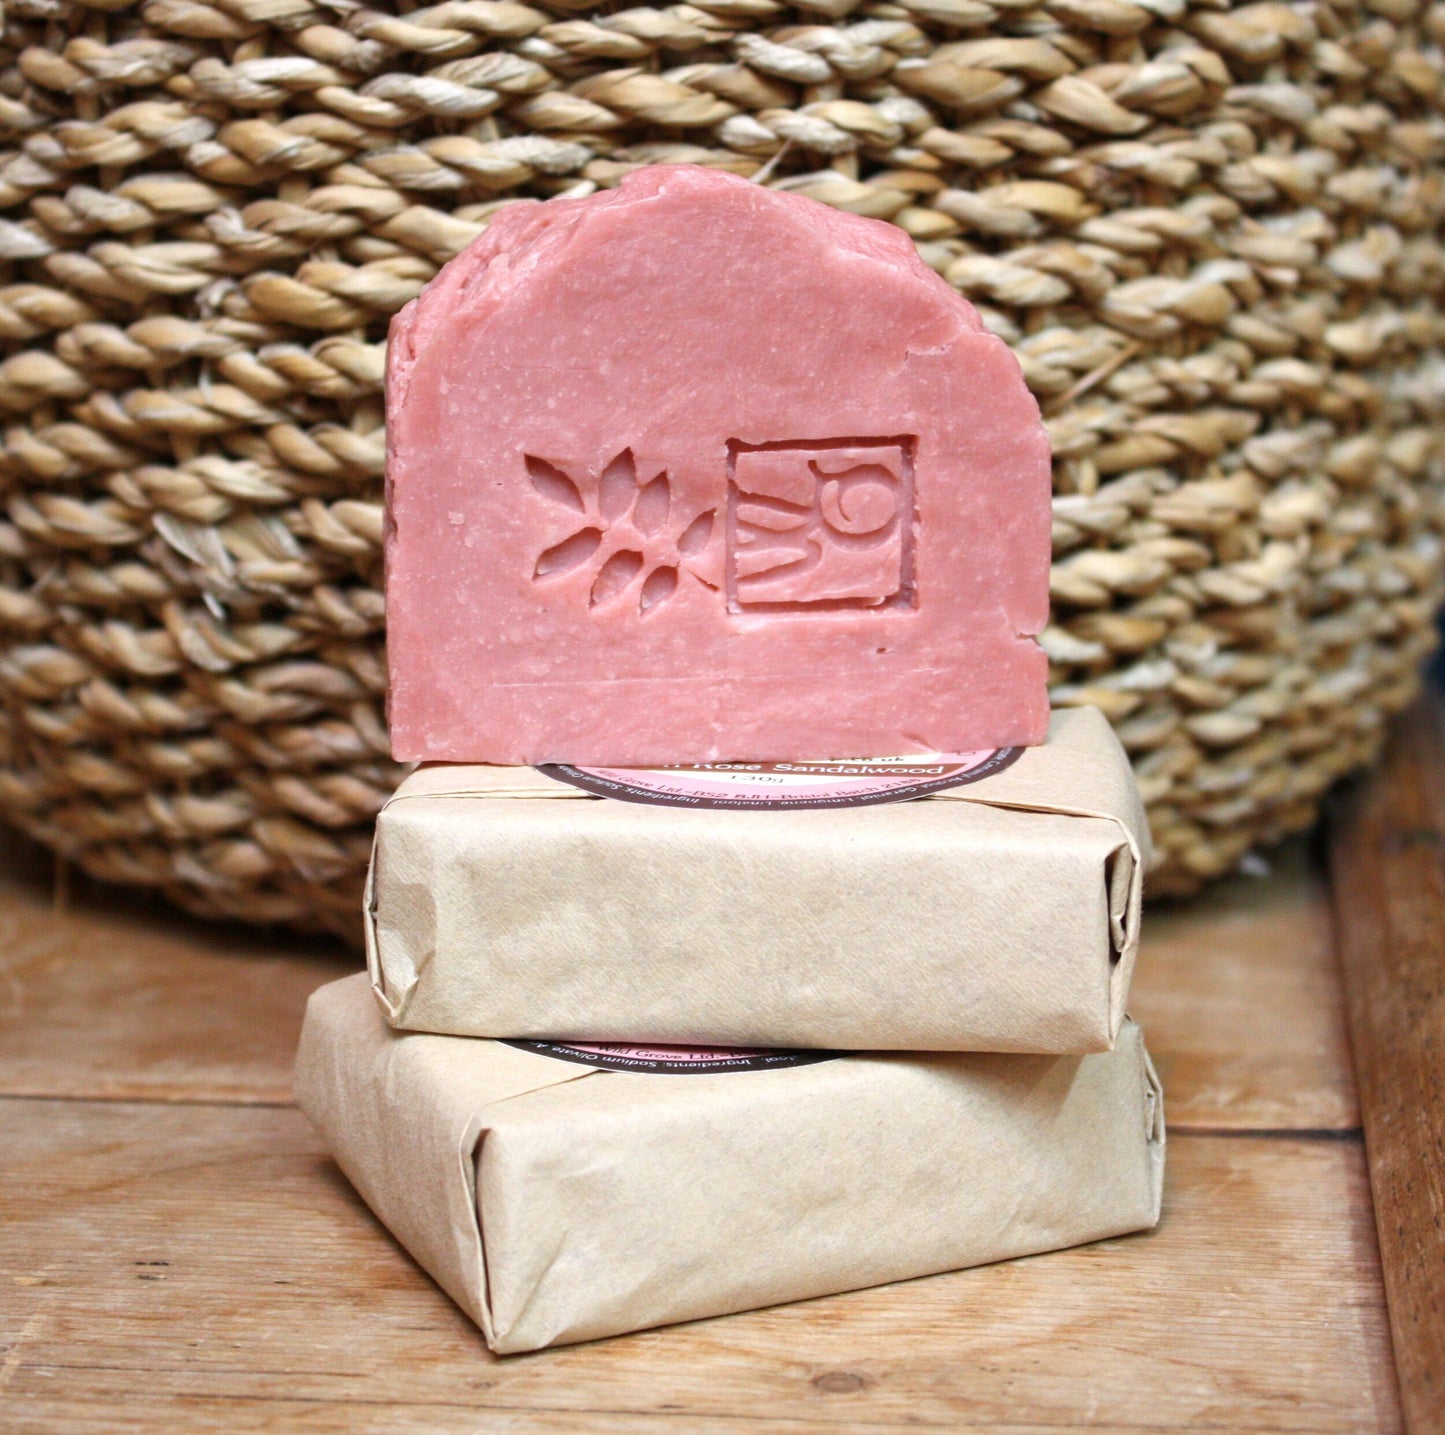 English Rose and Sandalwood Hot Process Soap - The Bristol Artisan Handmade Sustainable Gifts and Homewares.